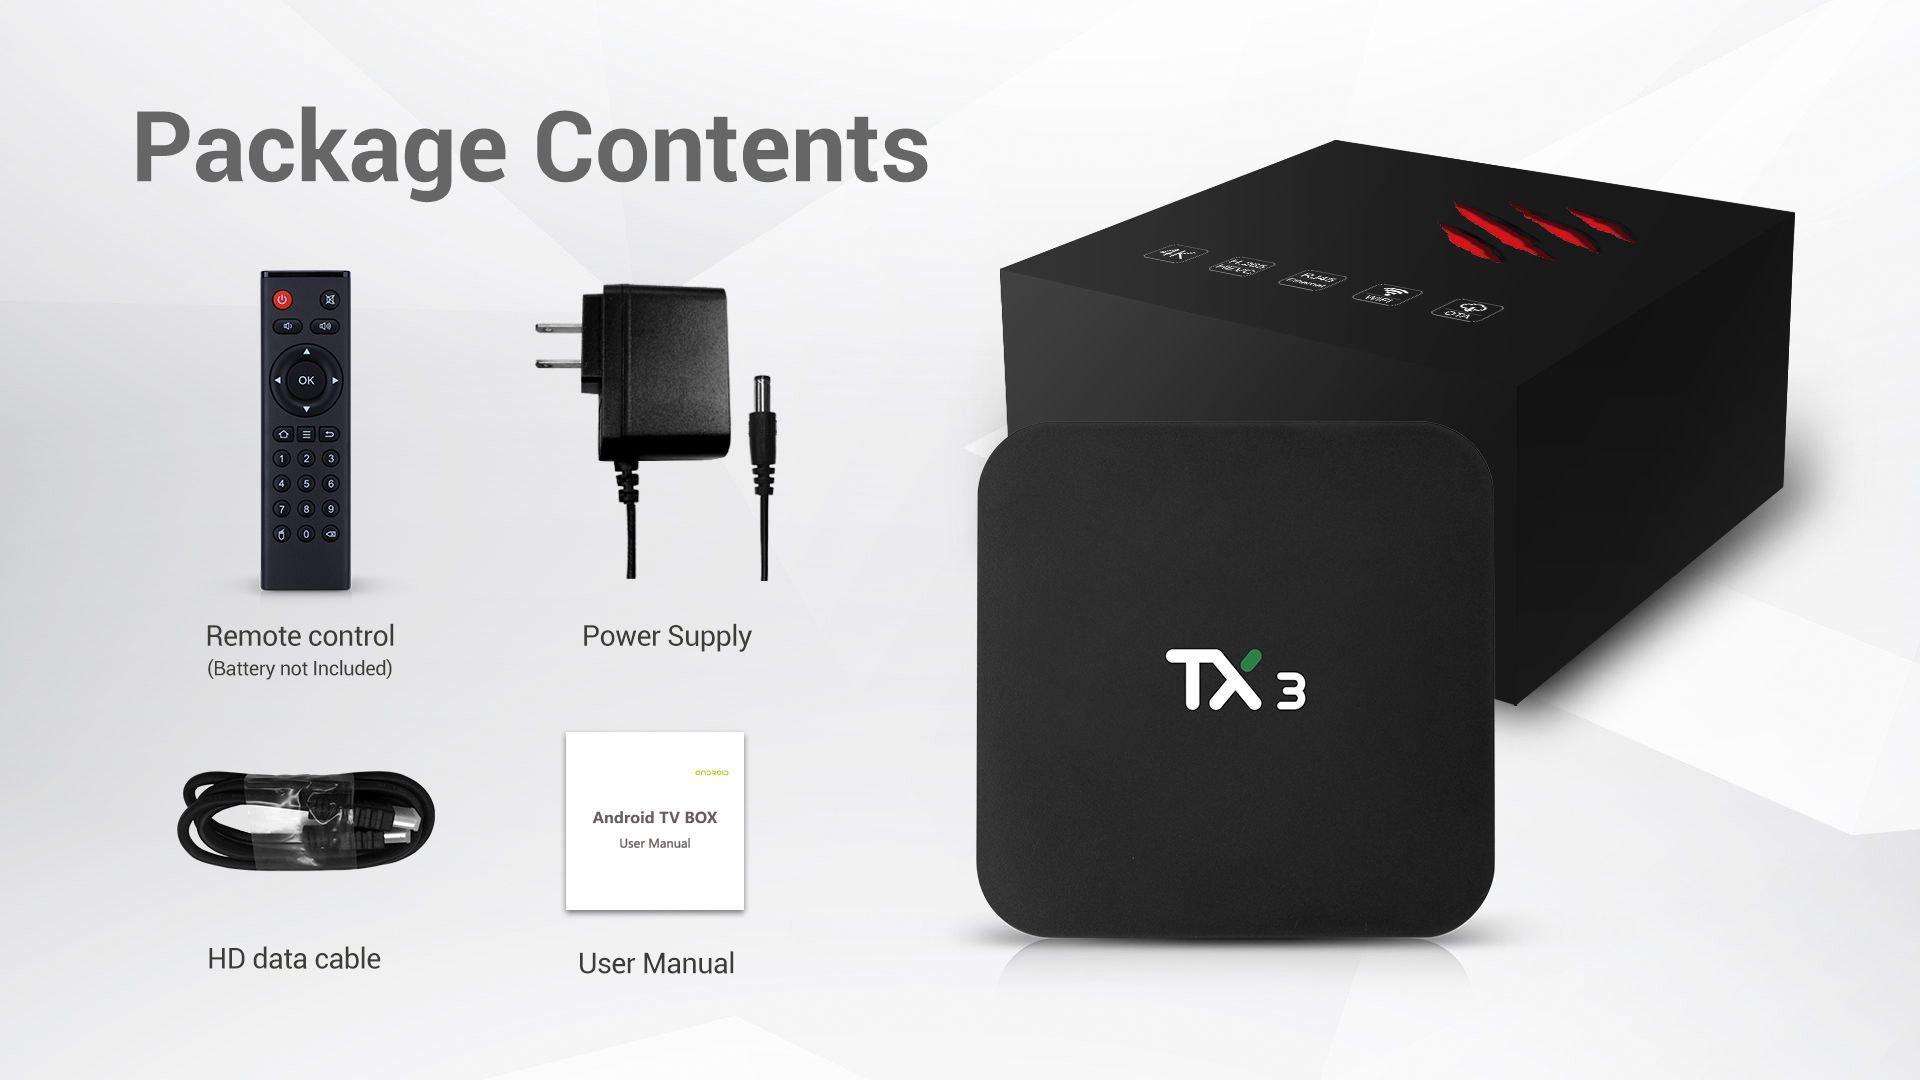 Tanix-TX3-S905X3-4GB-RAM-32GB-ROM-24G-5G-WiFi-Android-90-8K-TV-Box-Support-Voice-Control-1582529